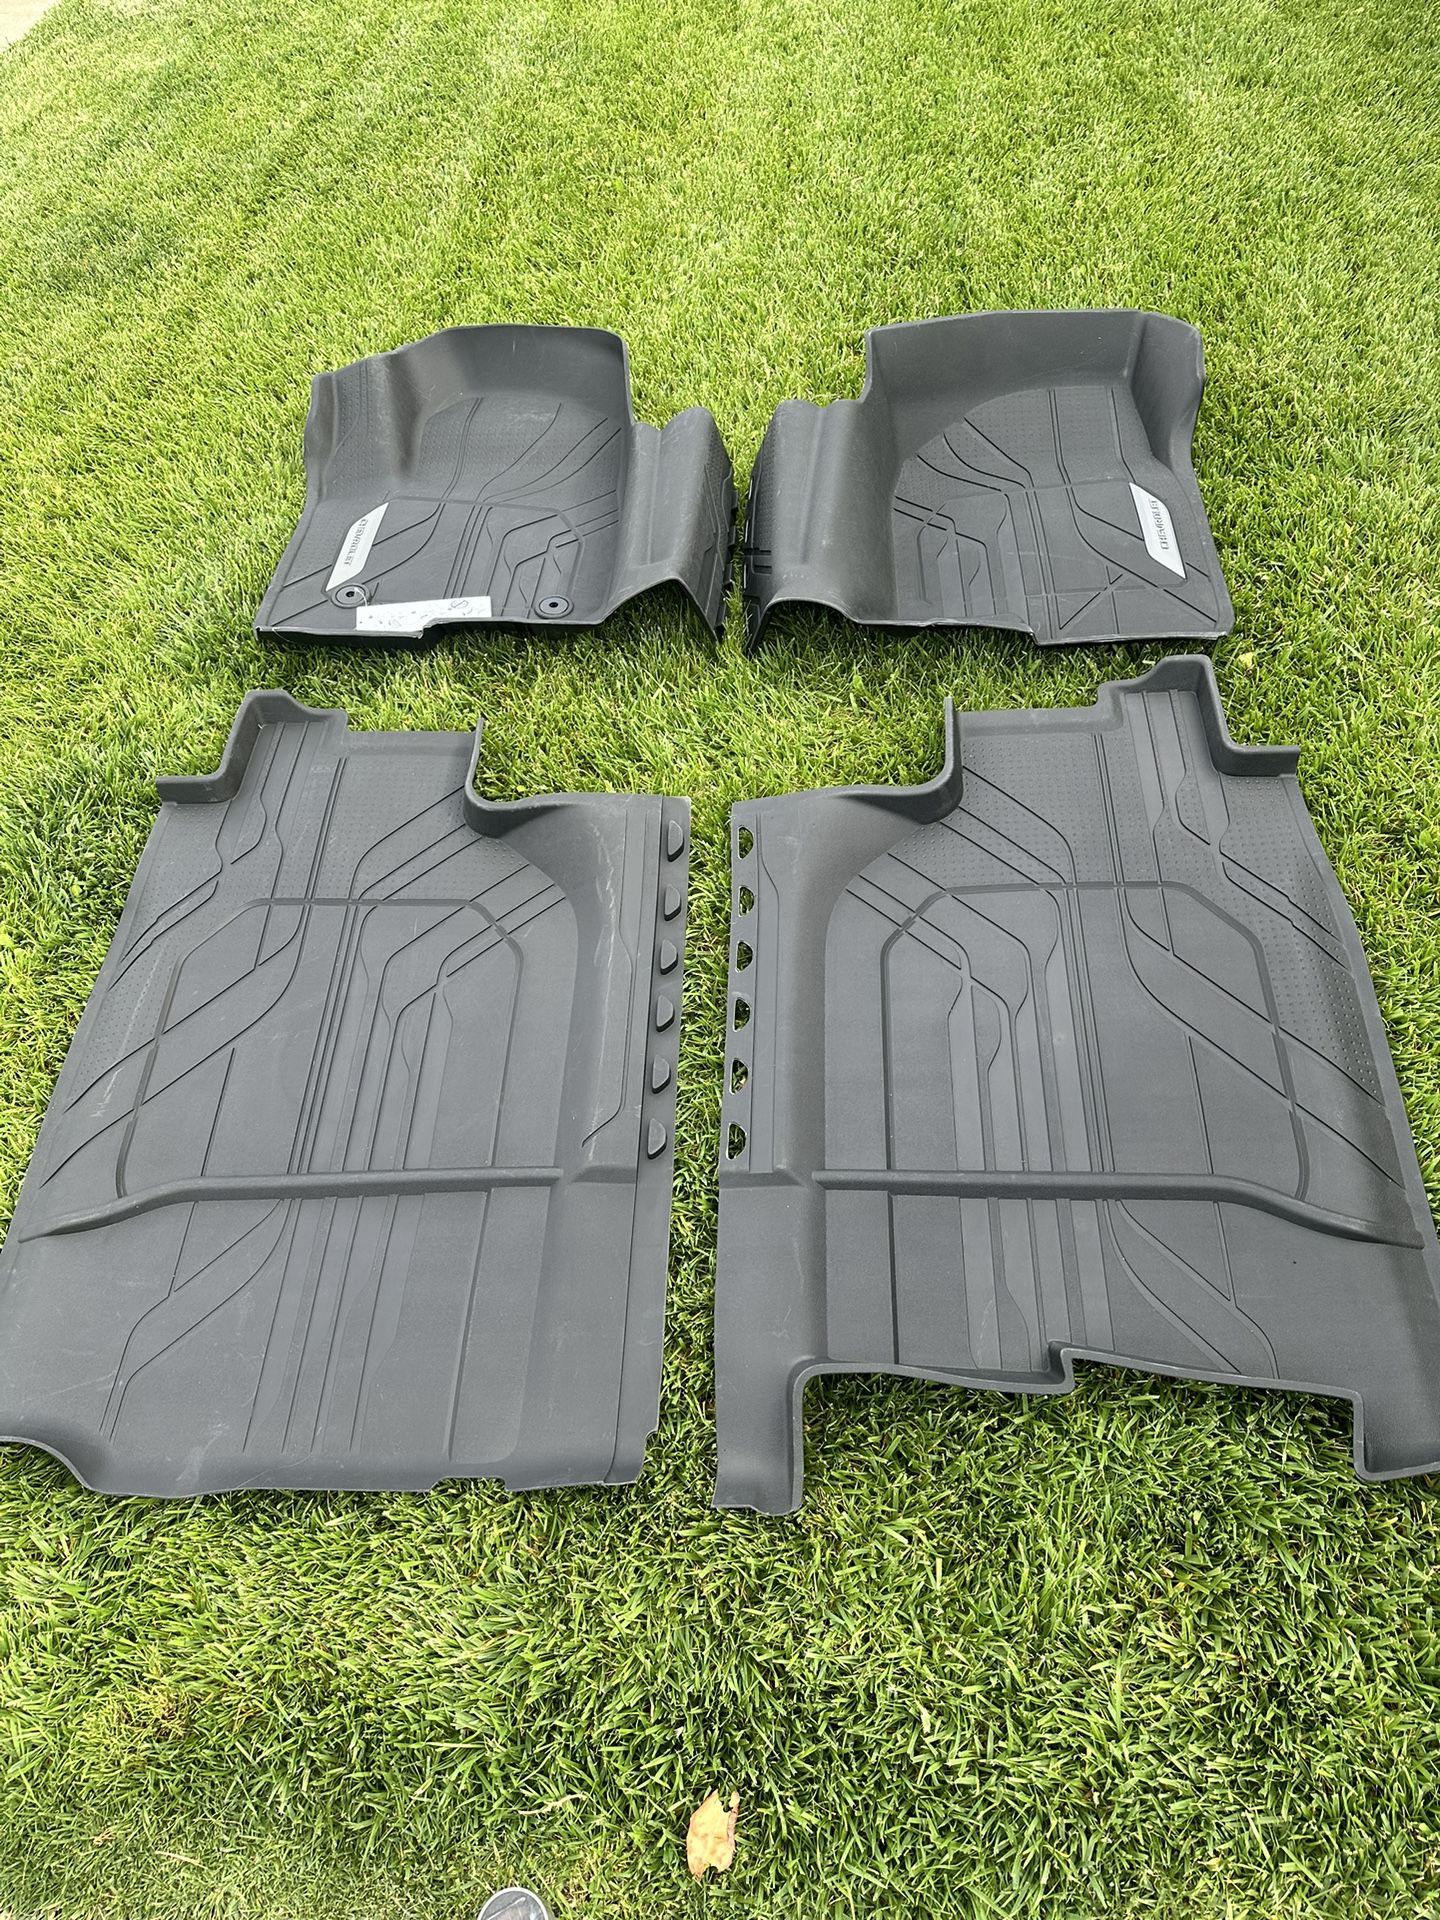 2019-2024 GM Chevrolet Silverado 1(contact info removed) 3500 Truck OEM All weather Floor Liner 